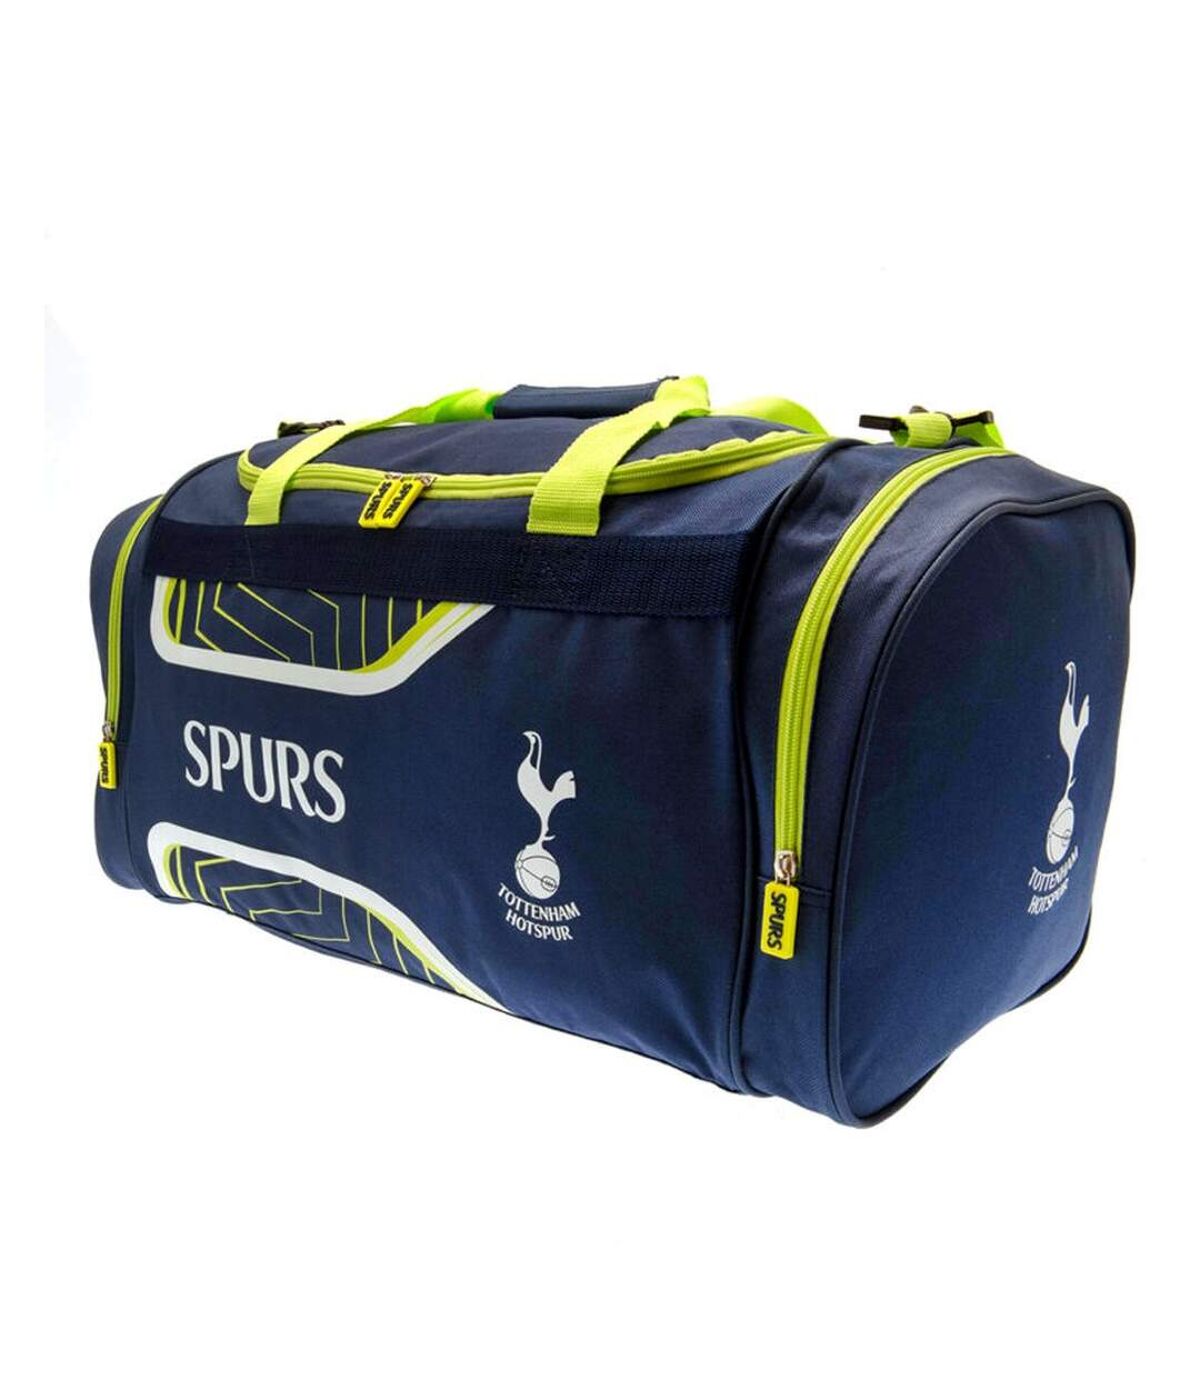 Tottenham Hotspur FC Flash Carryall (Navy Blue/White/Lime Green) (One Size)